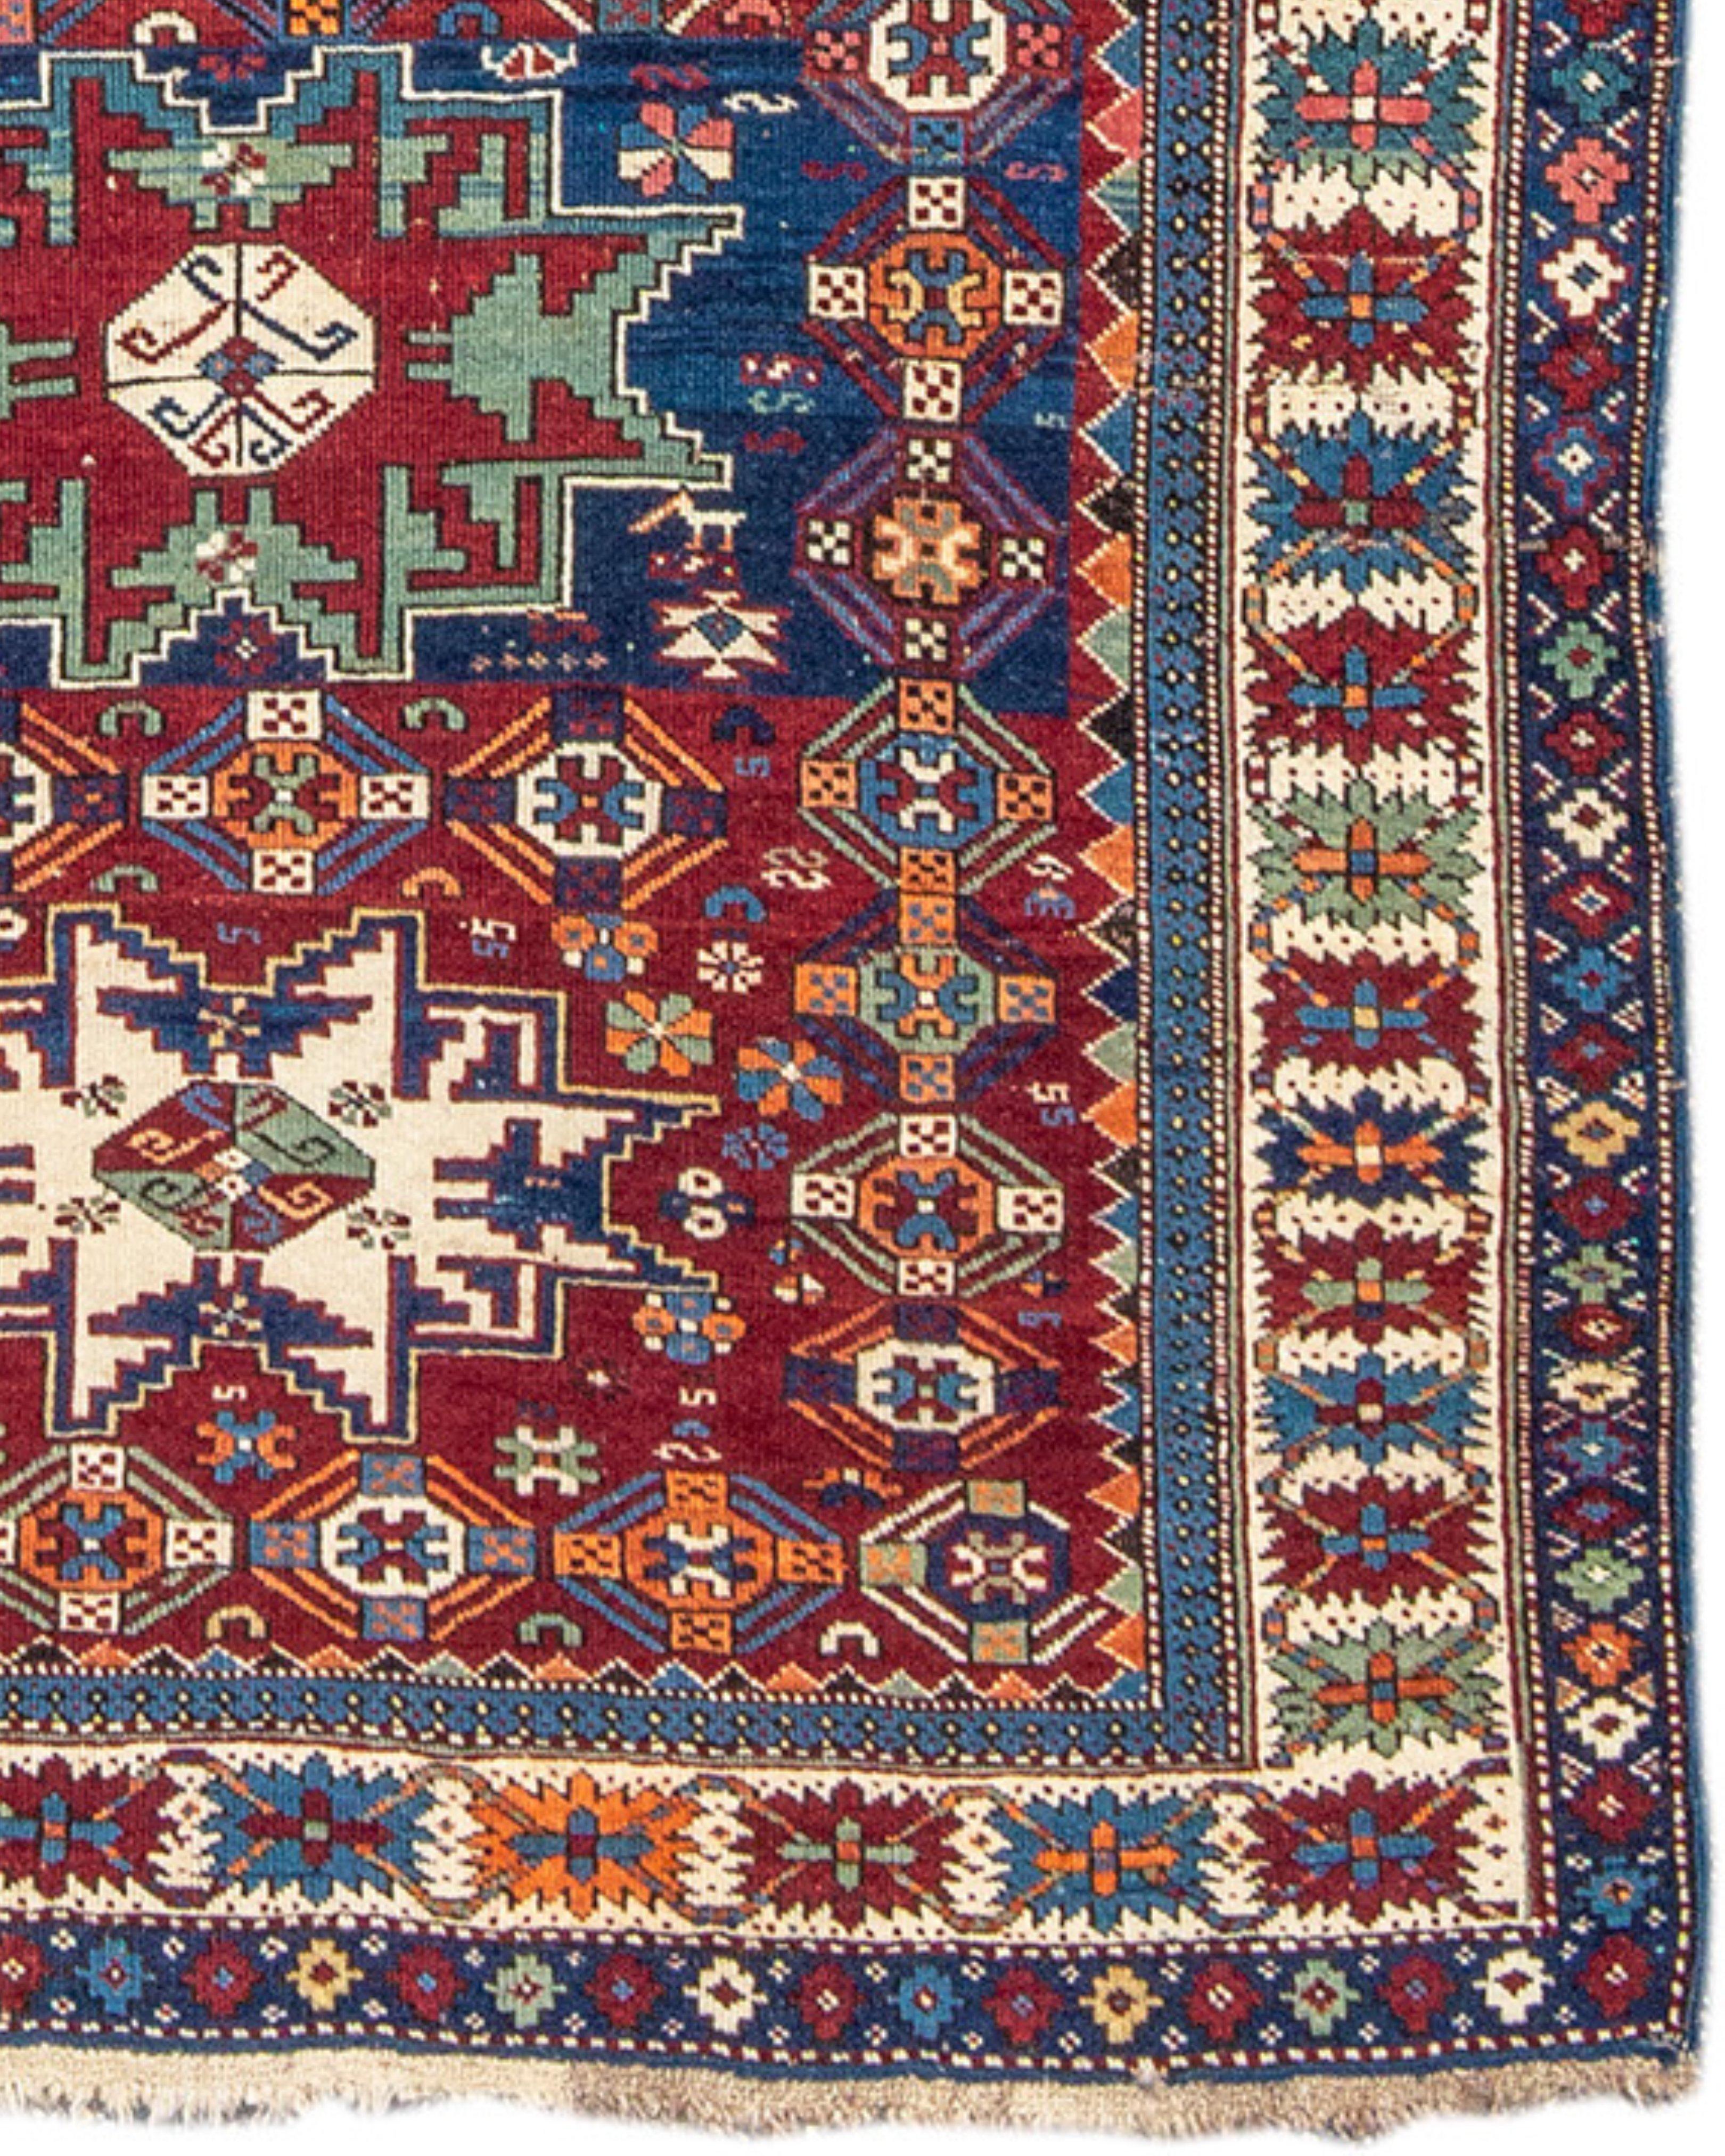 Lesghi Kuba Runner Rug, Late 19th century In Excellent Condition For Sale In San Francisco, CA